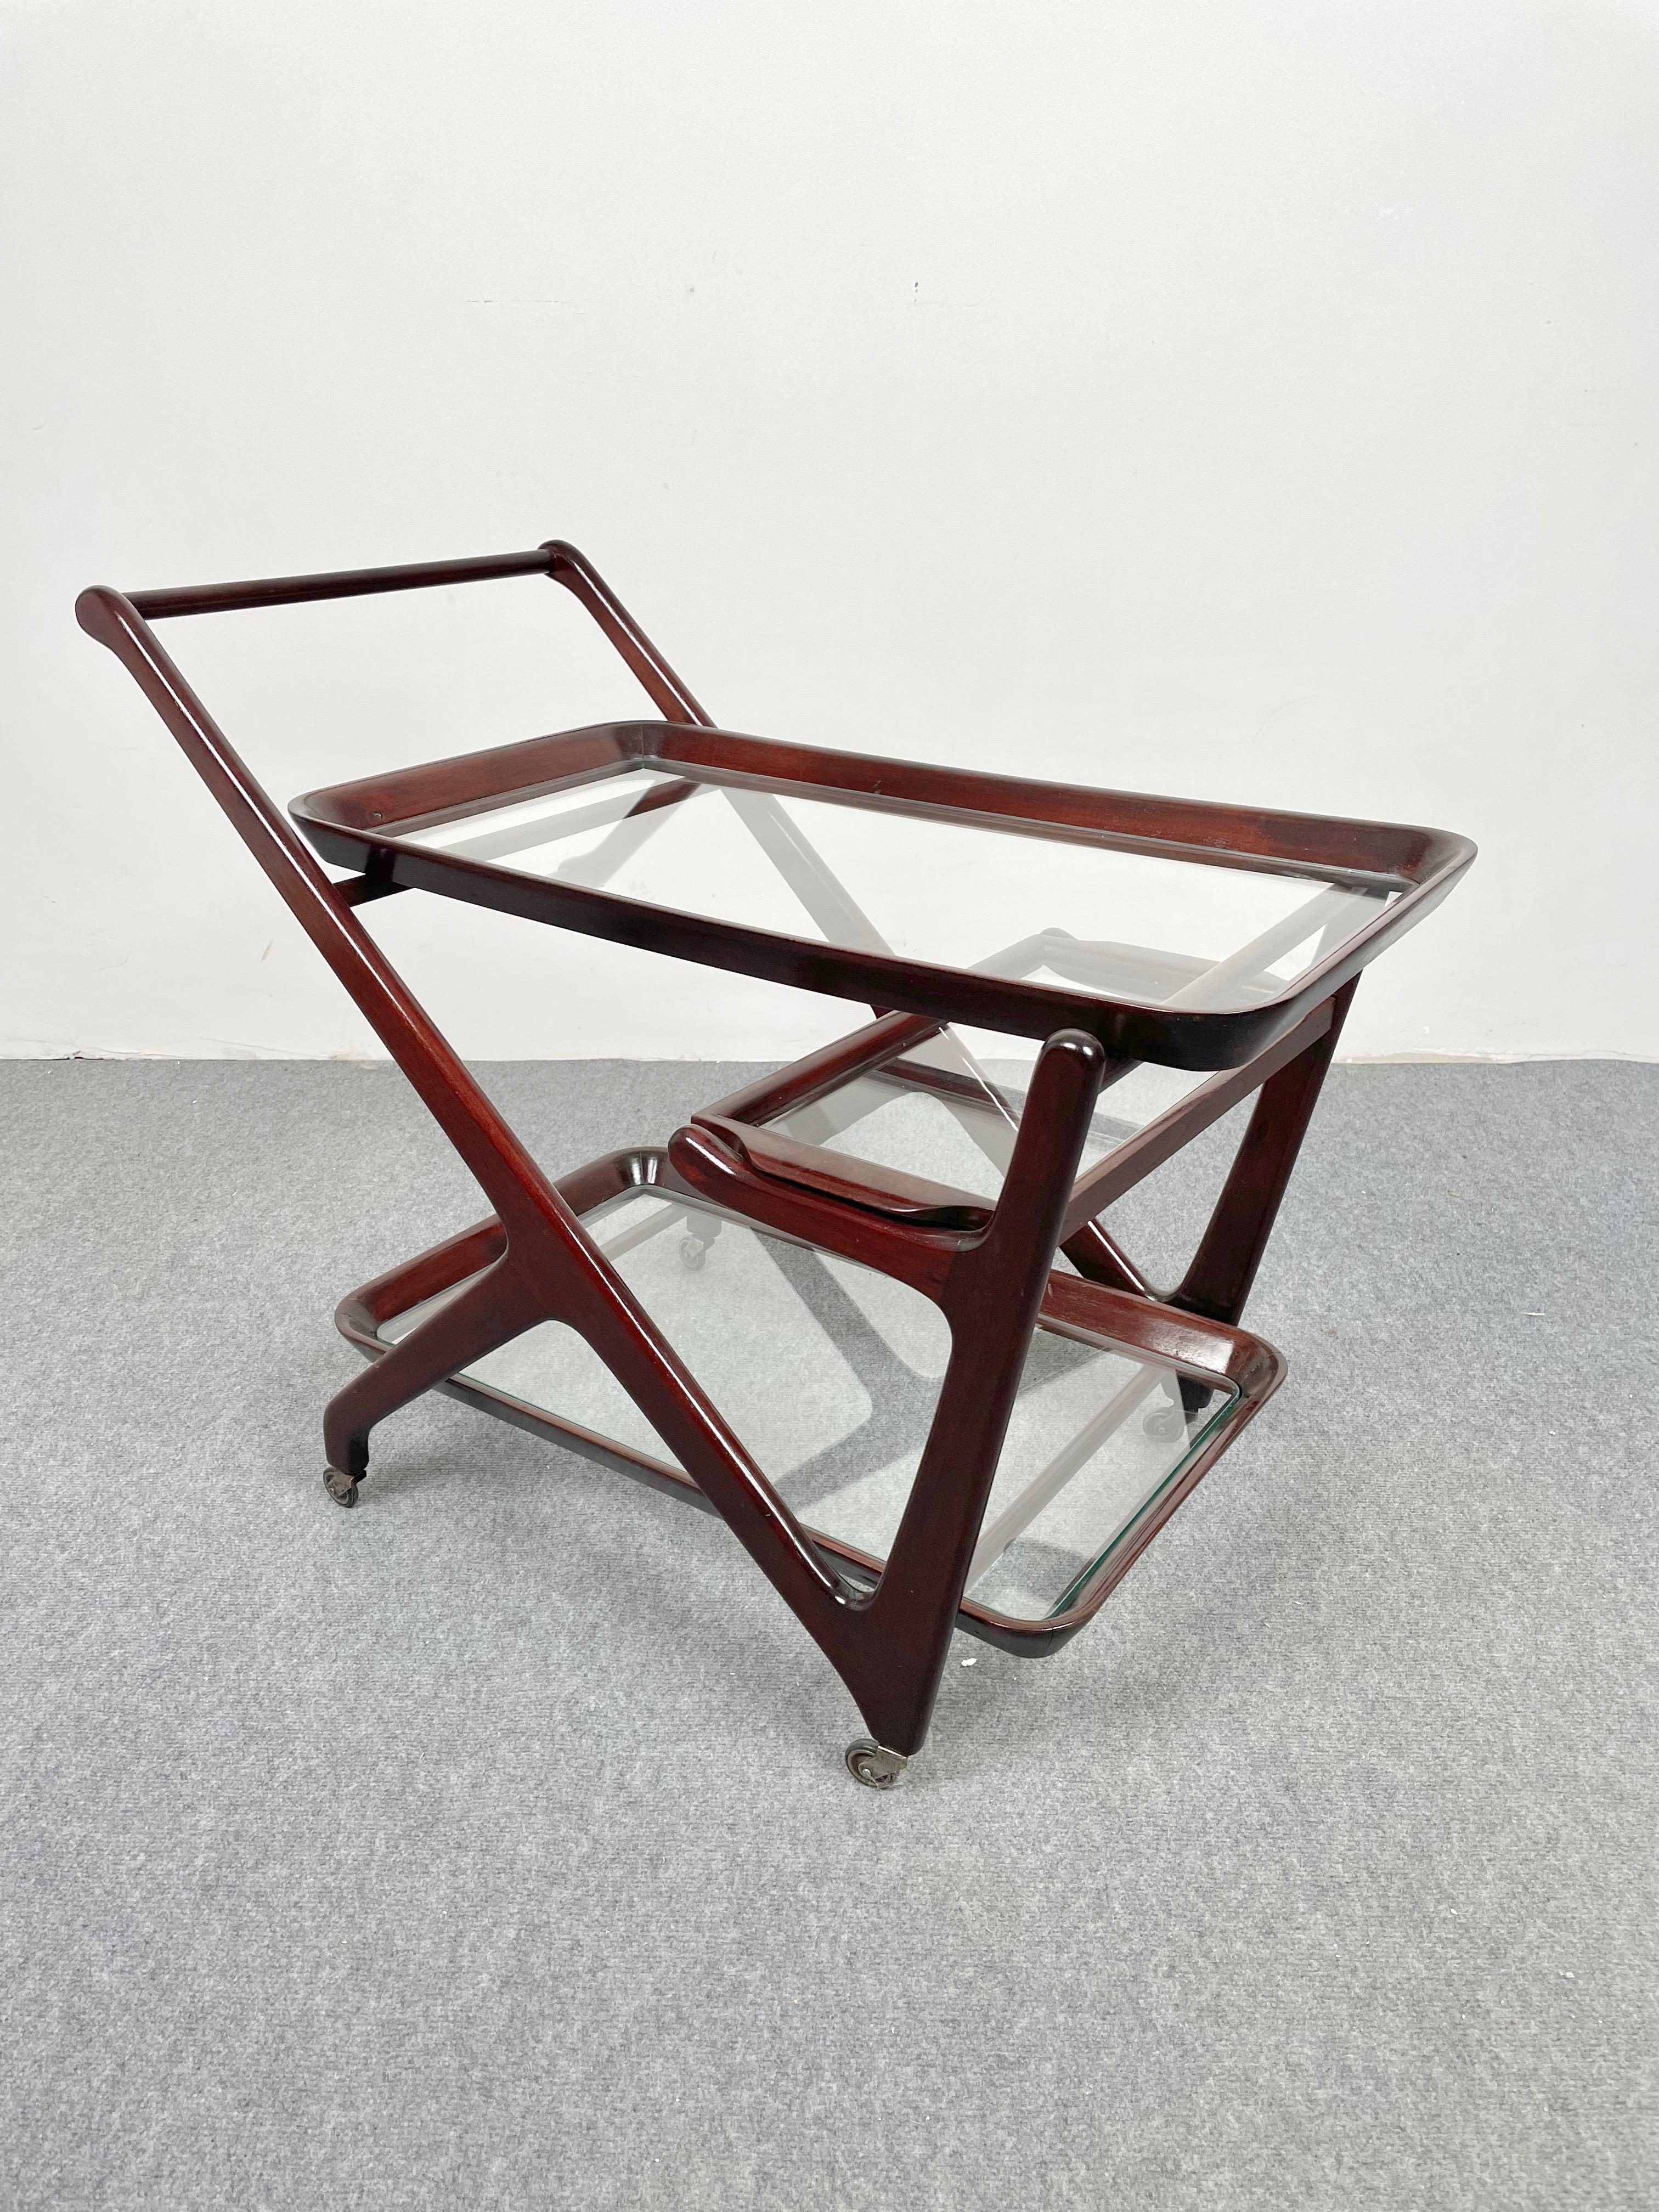 1950s serving bar cart featuring wood structure and three glass shelves by the Italian designer Cesare Lacca.
The little tray in the middle is removable.